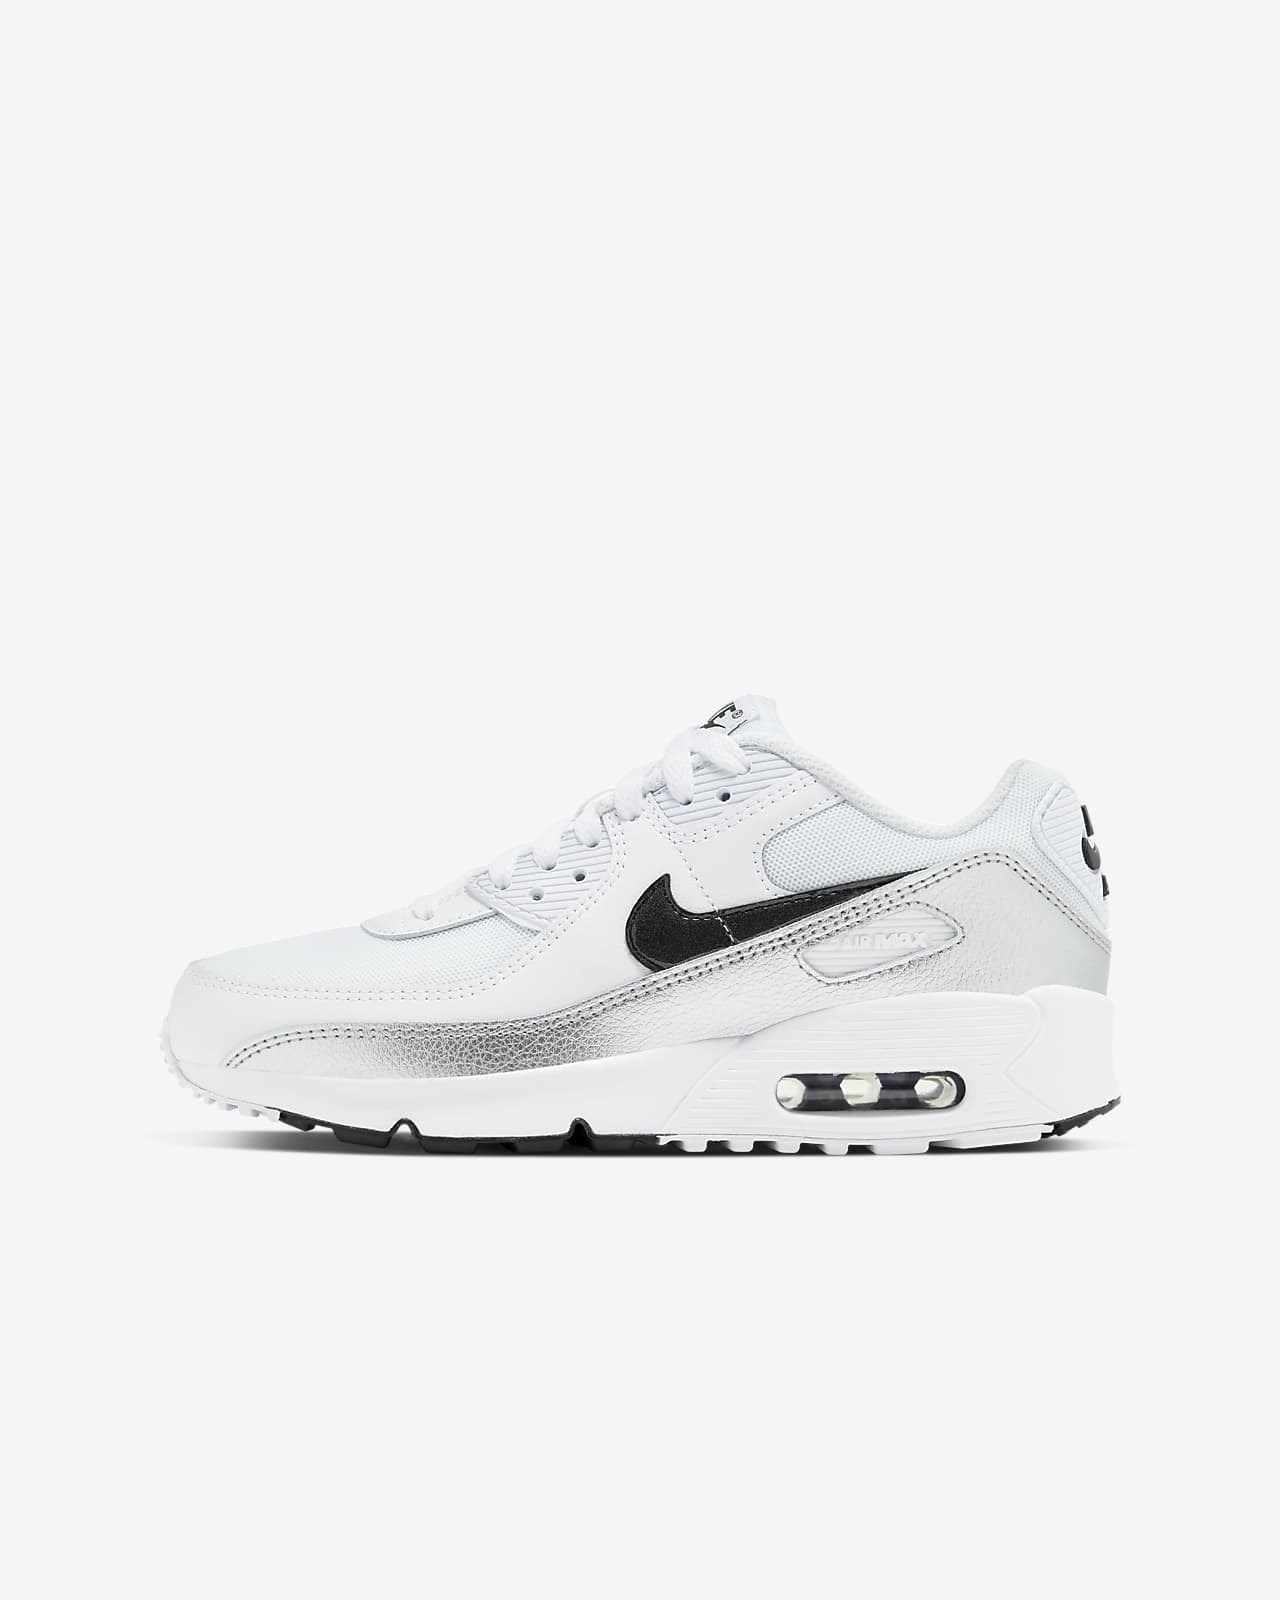 Soldes > chaussures nike air max 90 > en stock